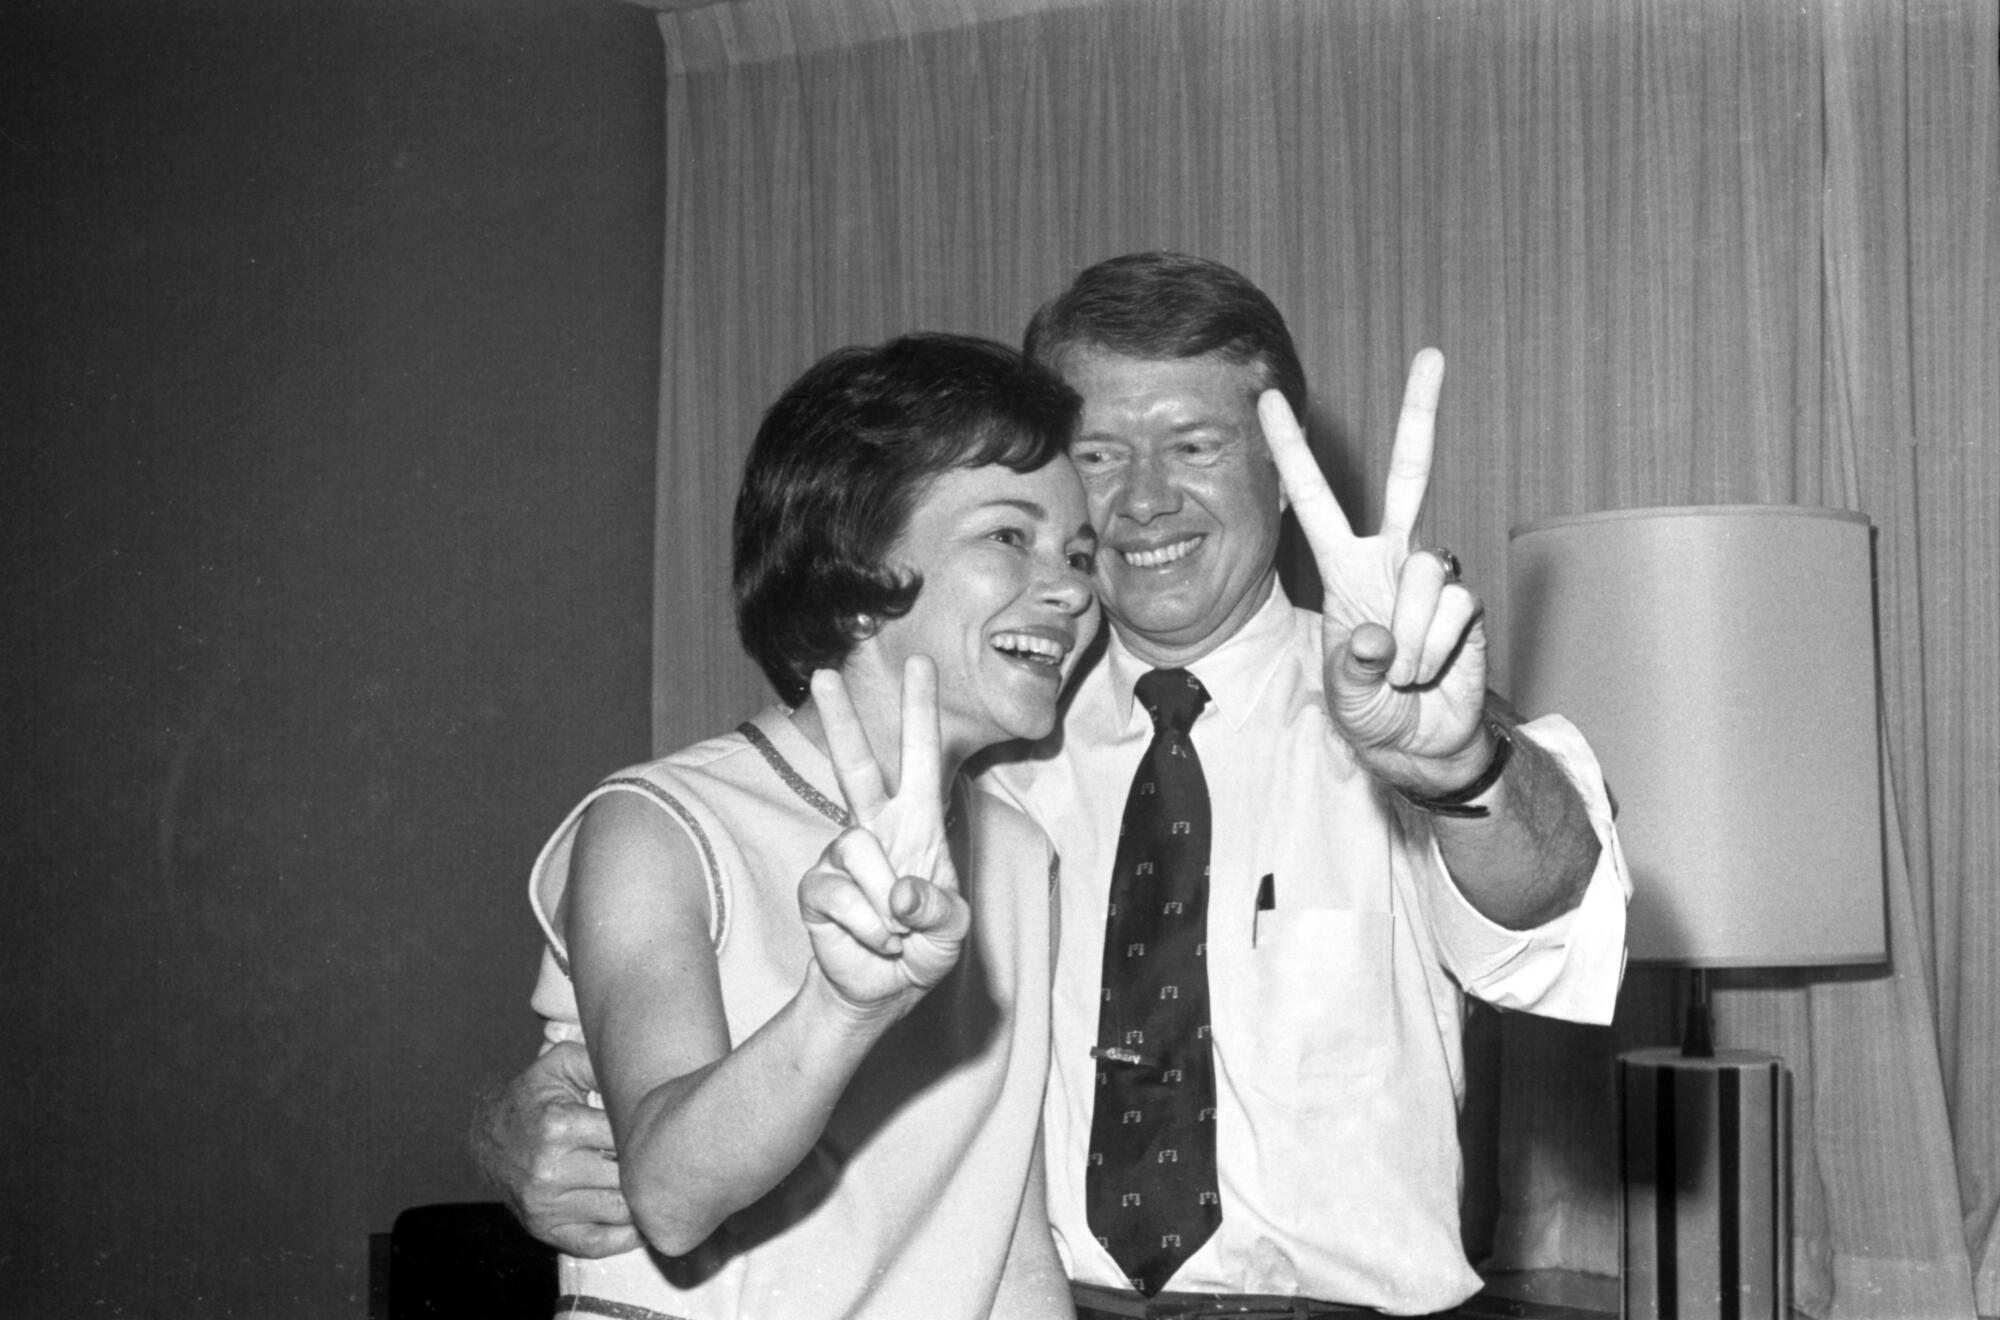 Jimmy and Rosalynn Carter hold up their fingers in the V for victory sign